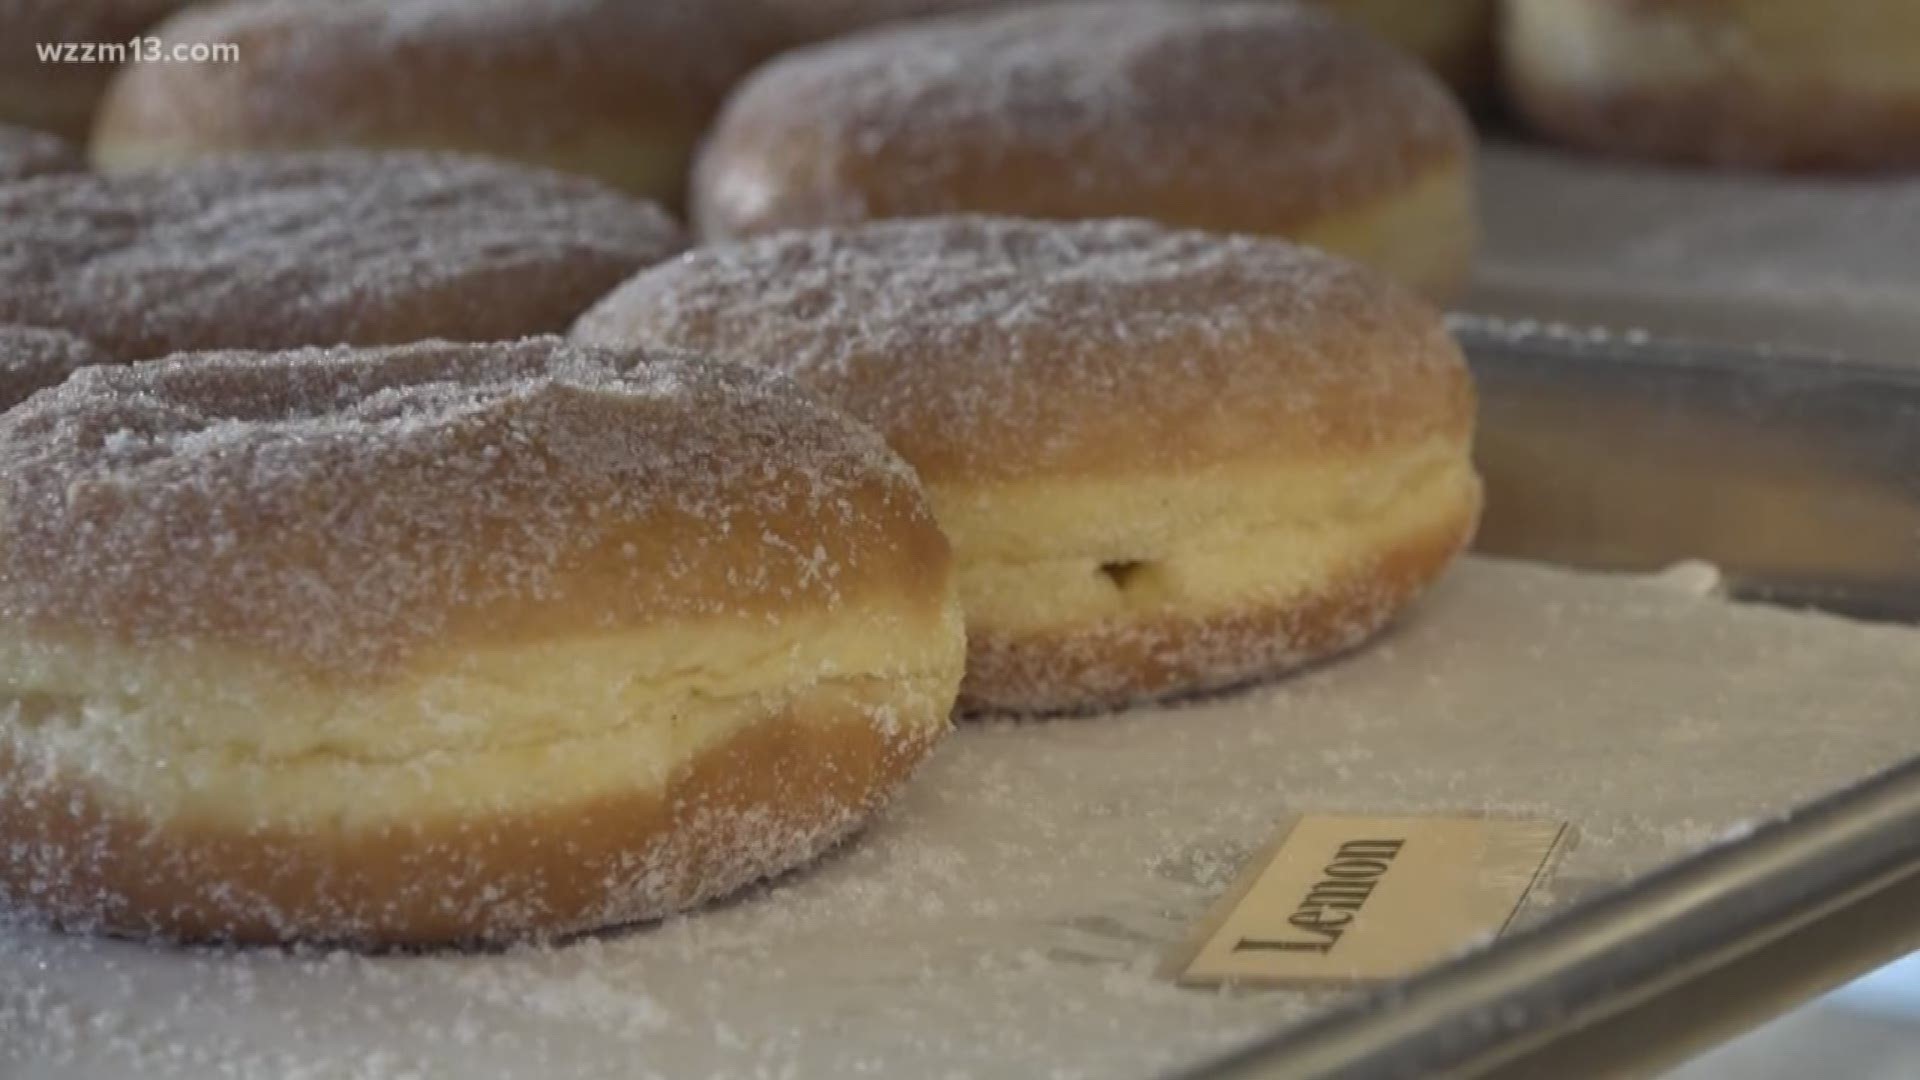 In celebration of Fat Tuesday, Meteorologist Laura Hartman got a very special lesson on how to make Paczki.